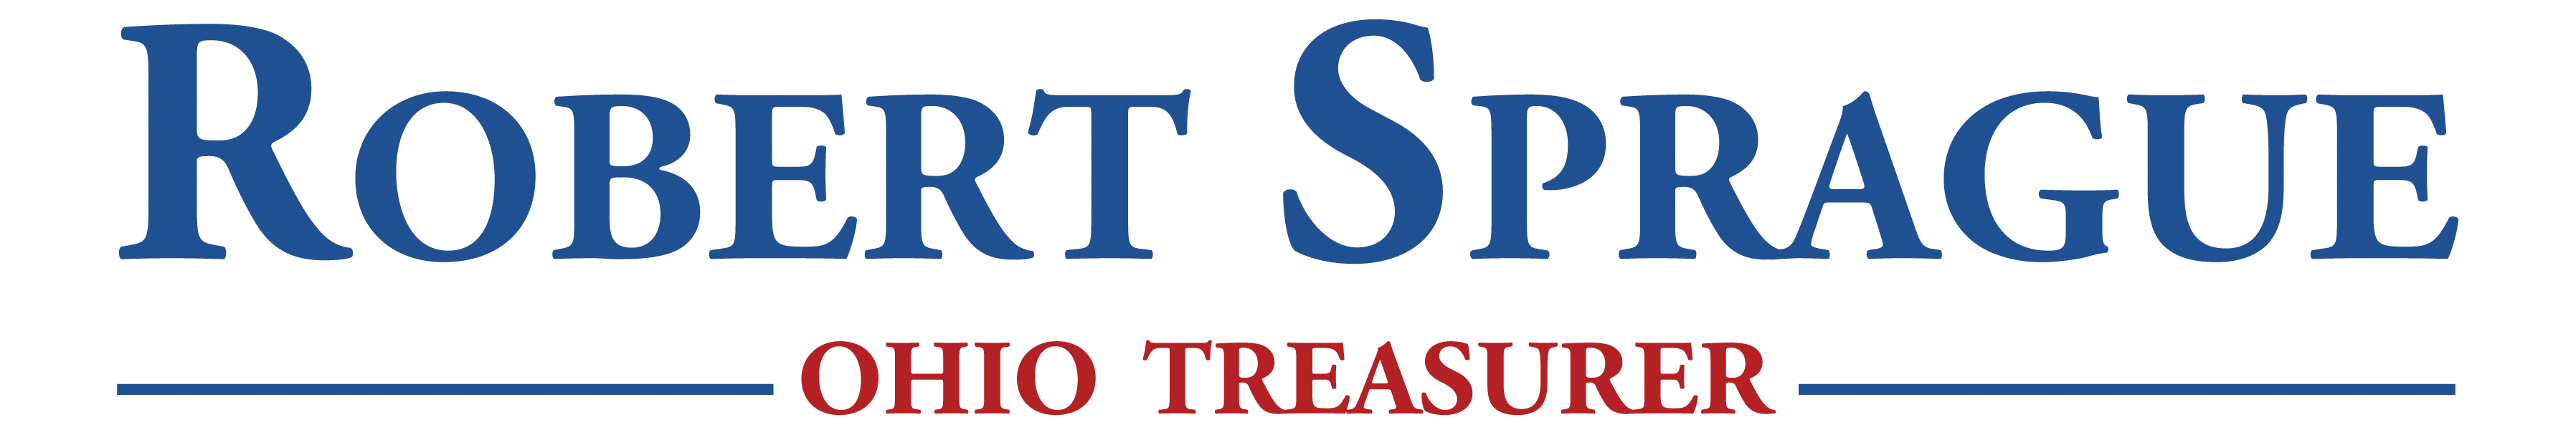 State Infrastructure Bank Programs - Official Seal or Logo